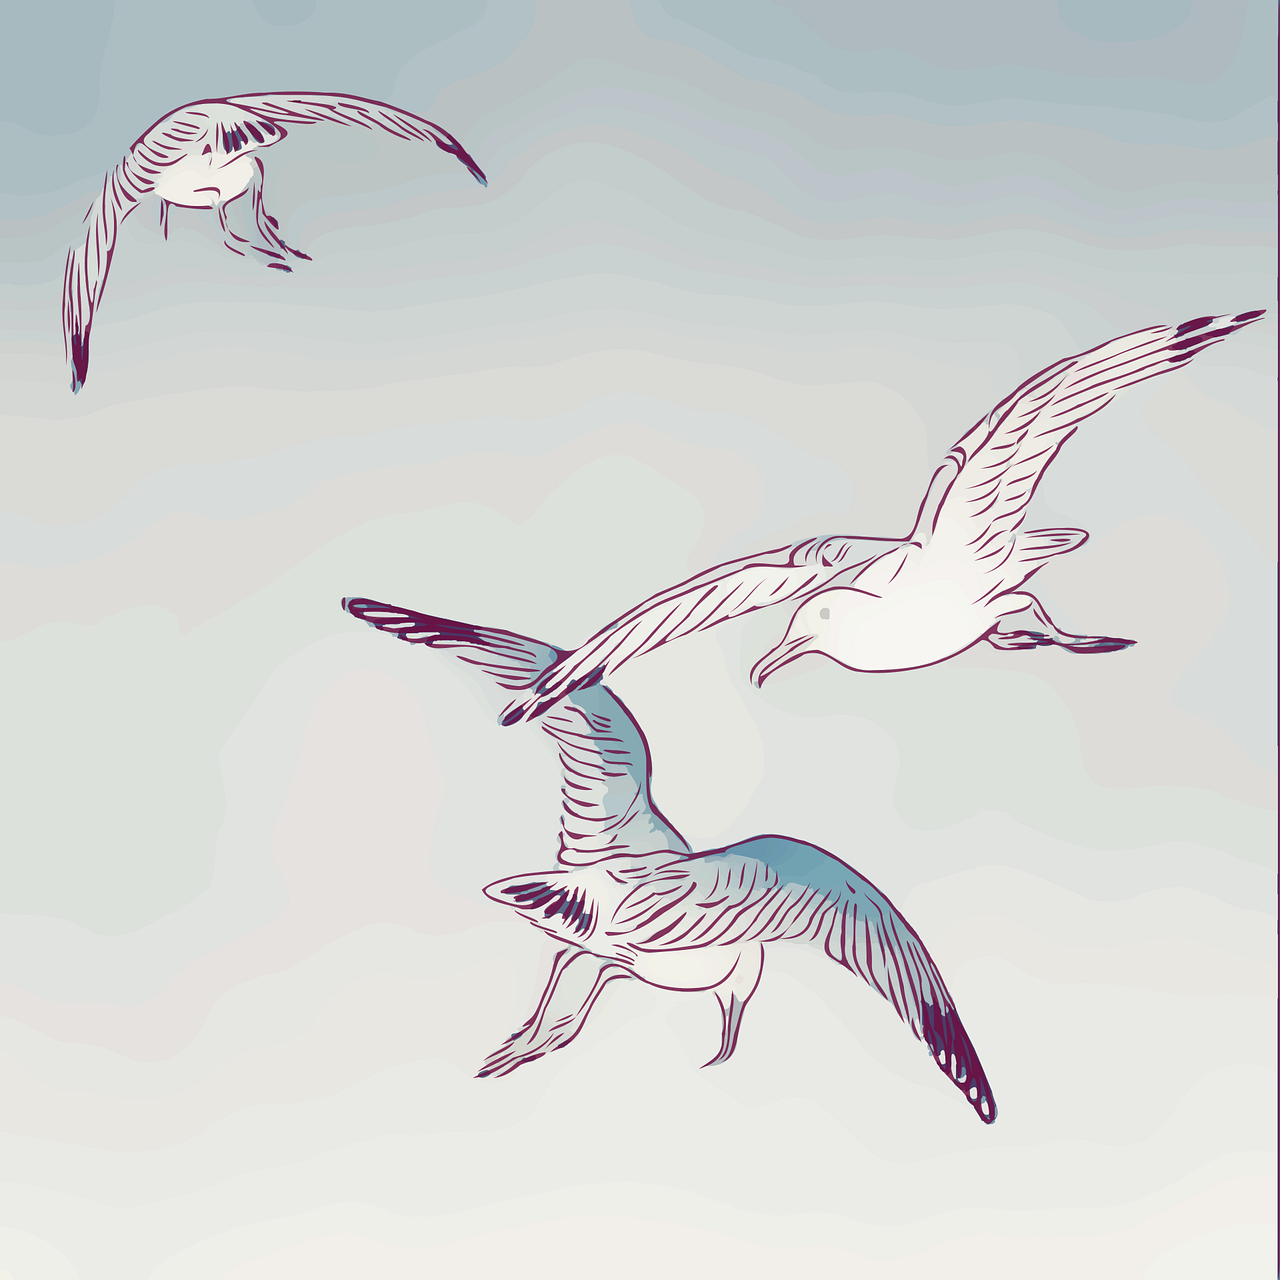 a couple of birds that are flying in the sky, an illustration of, fine art, trio, seagulls, colored screentone, poster illustration